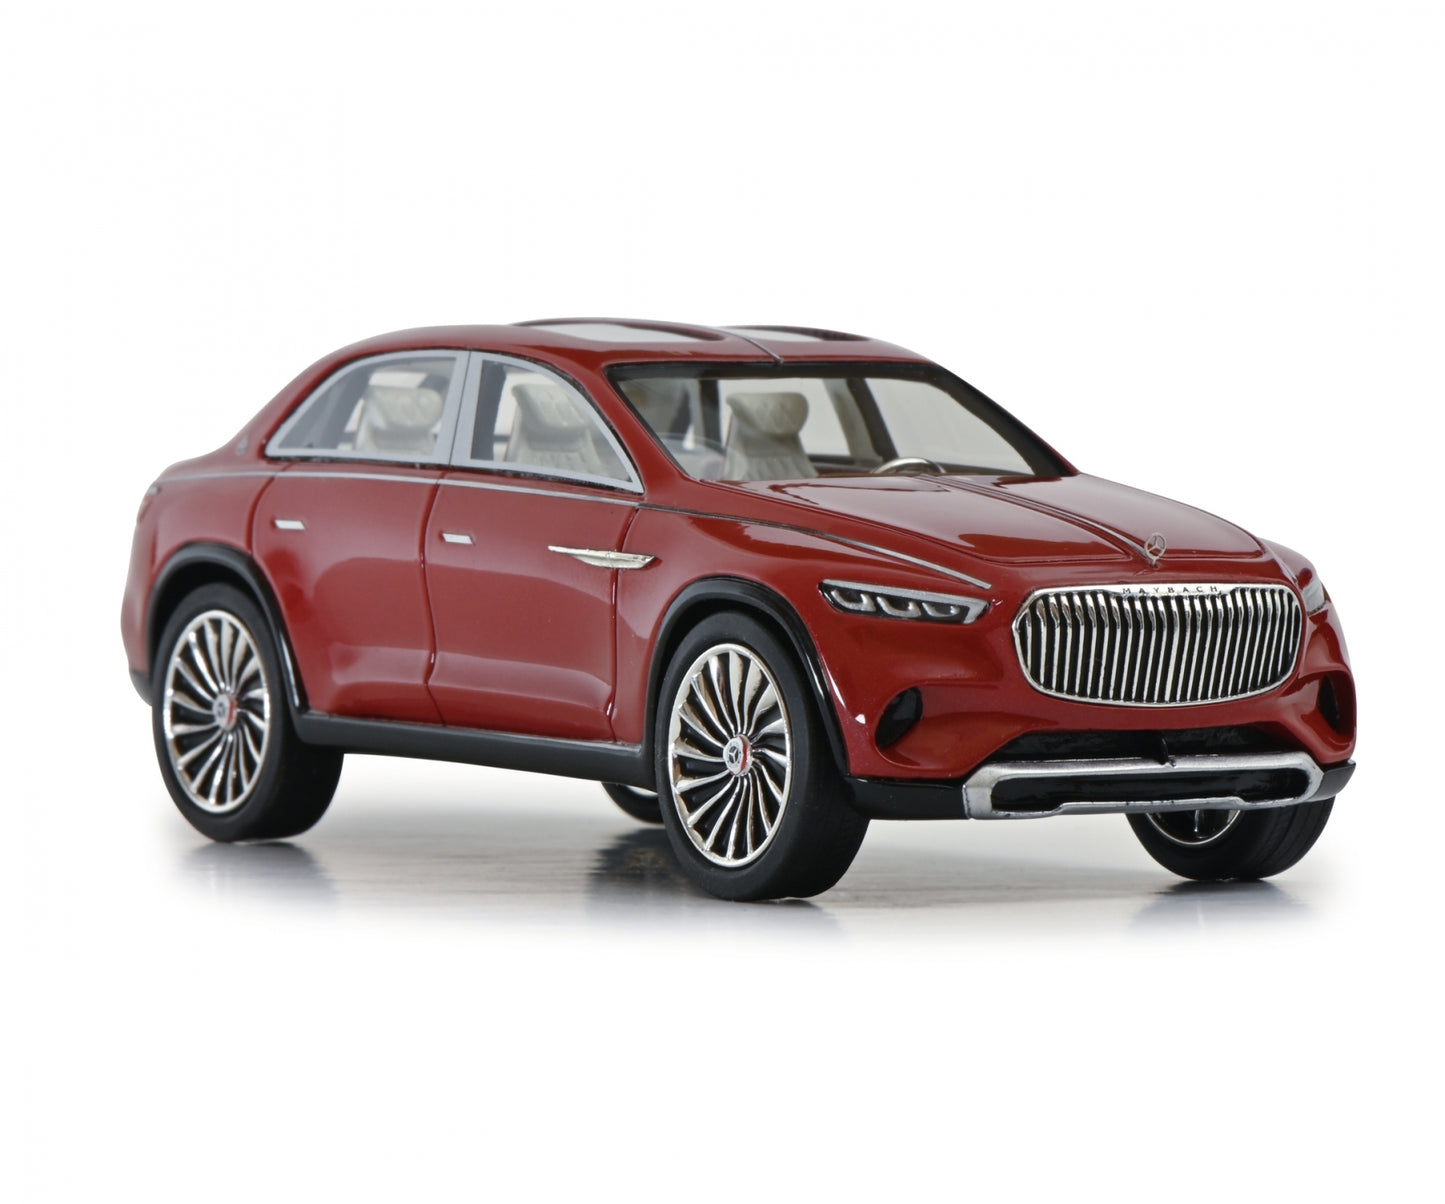 Schuco 1:43 Mercedes-Maybach Vision Ulimate Luxury 450909700